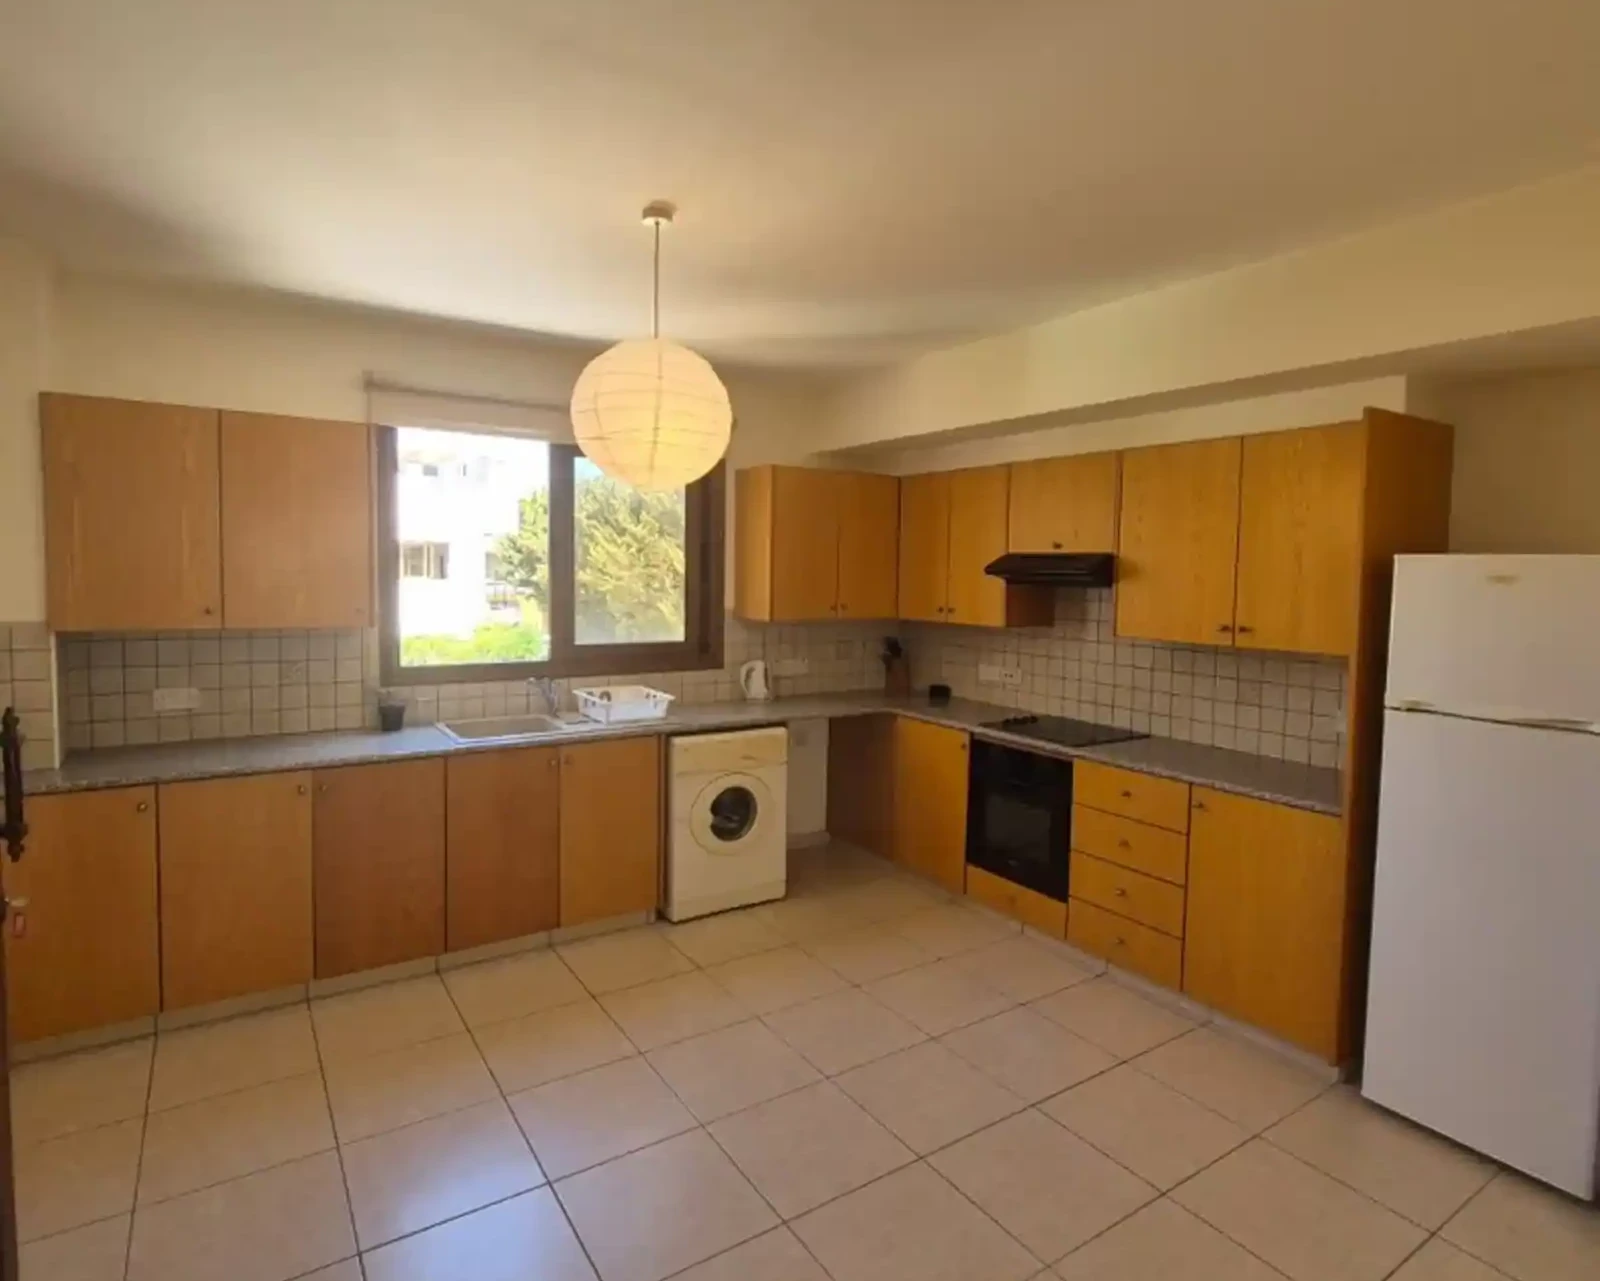 2-bedroom apartment fоr sаle €175.000, image 1